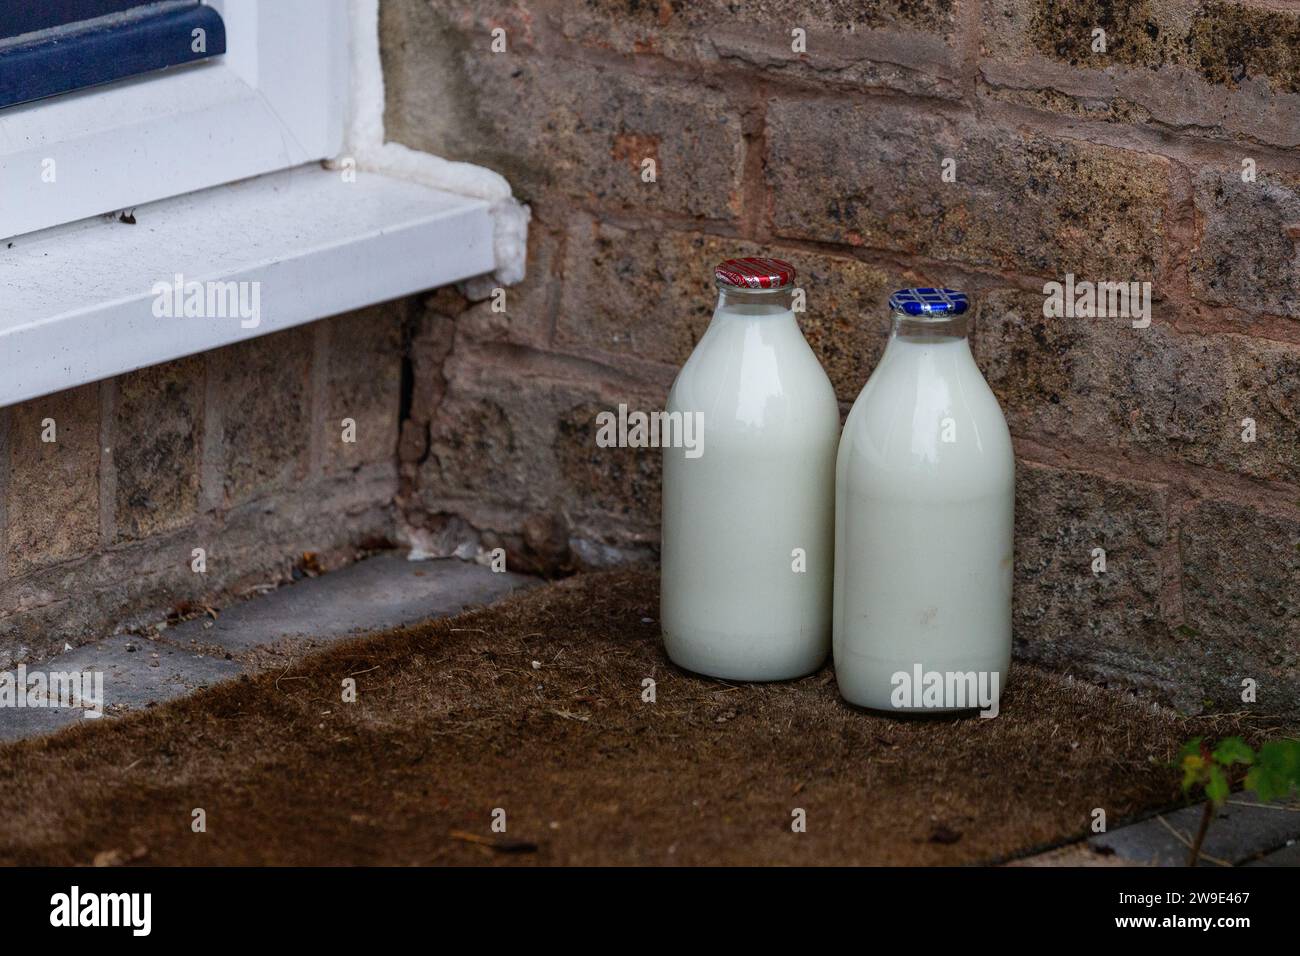 Doorstep milk delivery UK. A pint of skimmed milk and a pint of semi skimmed milk in glass bottles on a doorstep left by a milkman in the UK. Stock Photo